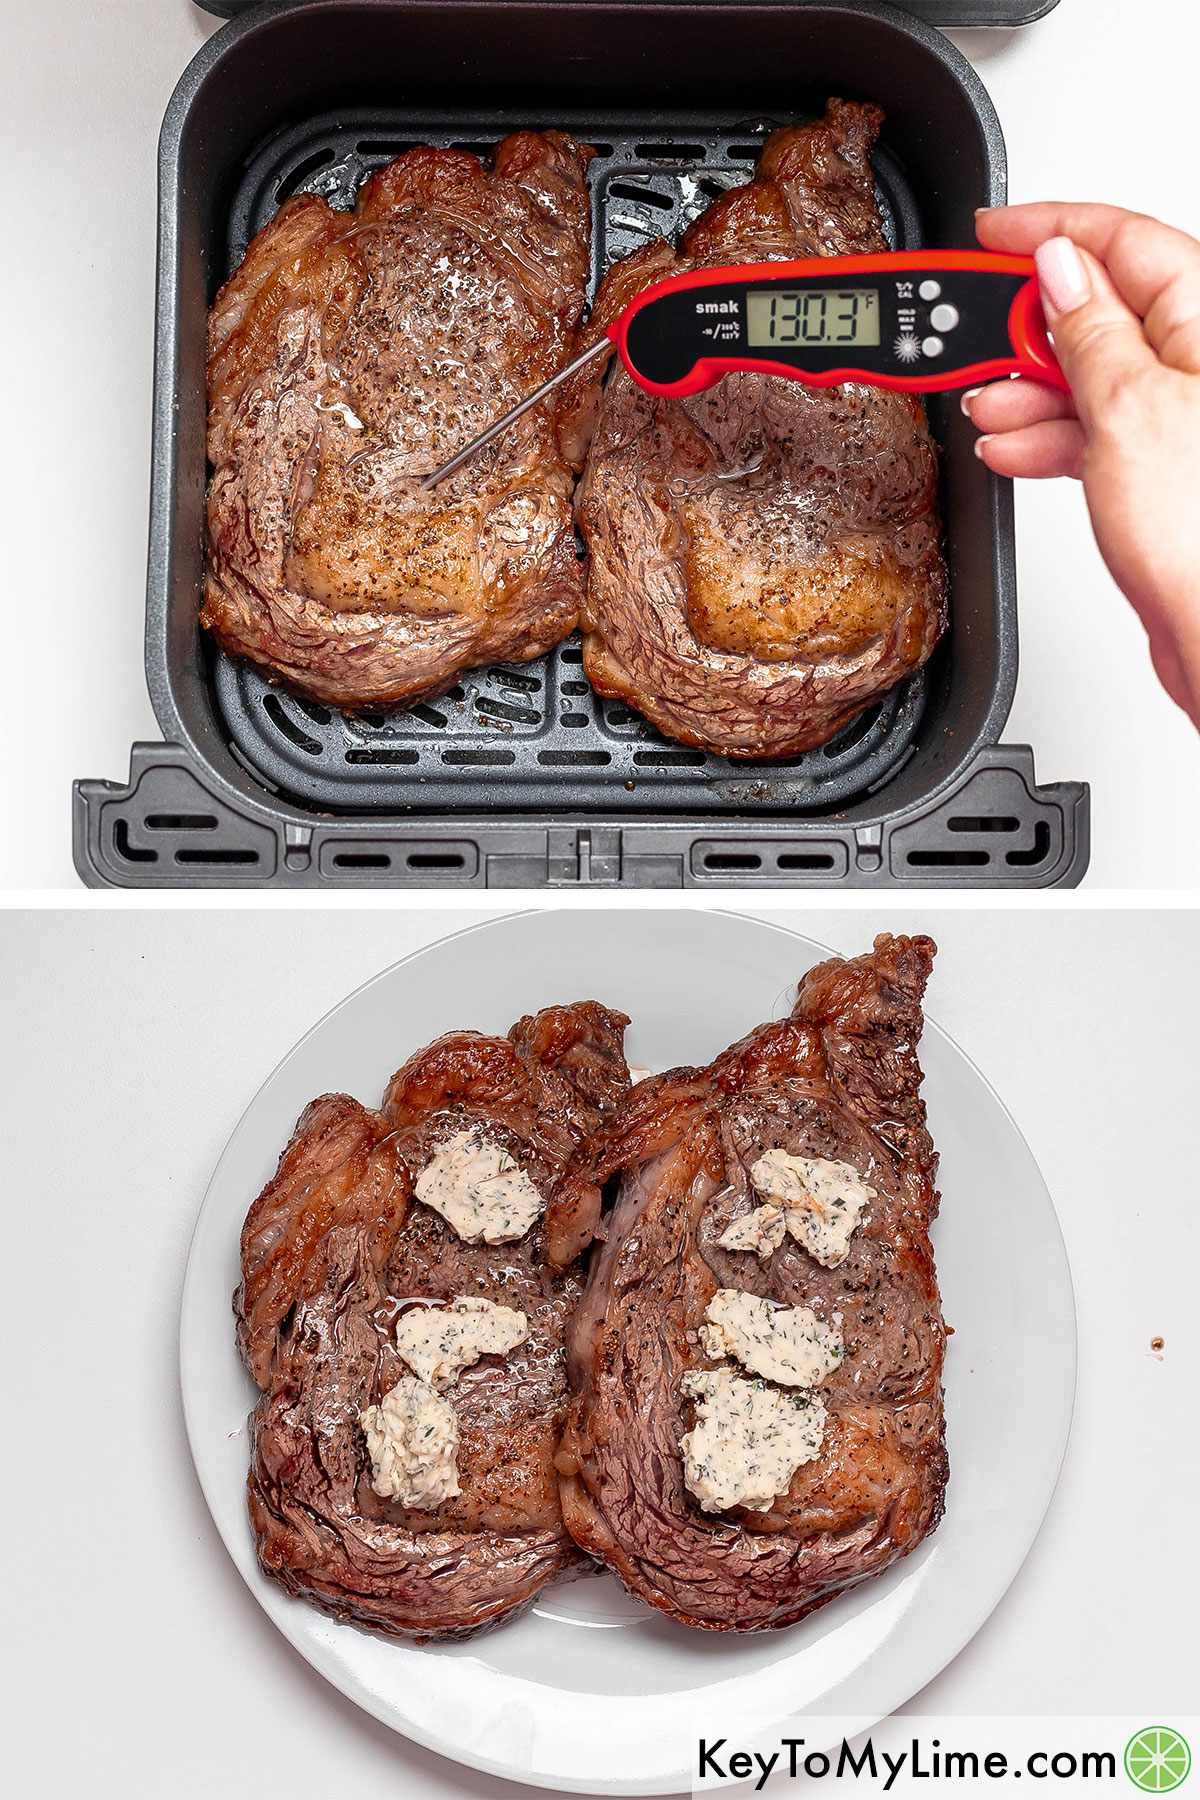 Removing the steaks from the air fryer once cooked, and then covering with herb and garlic butter.